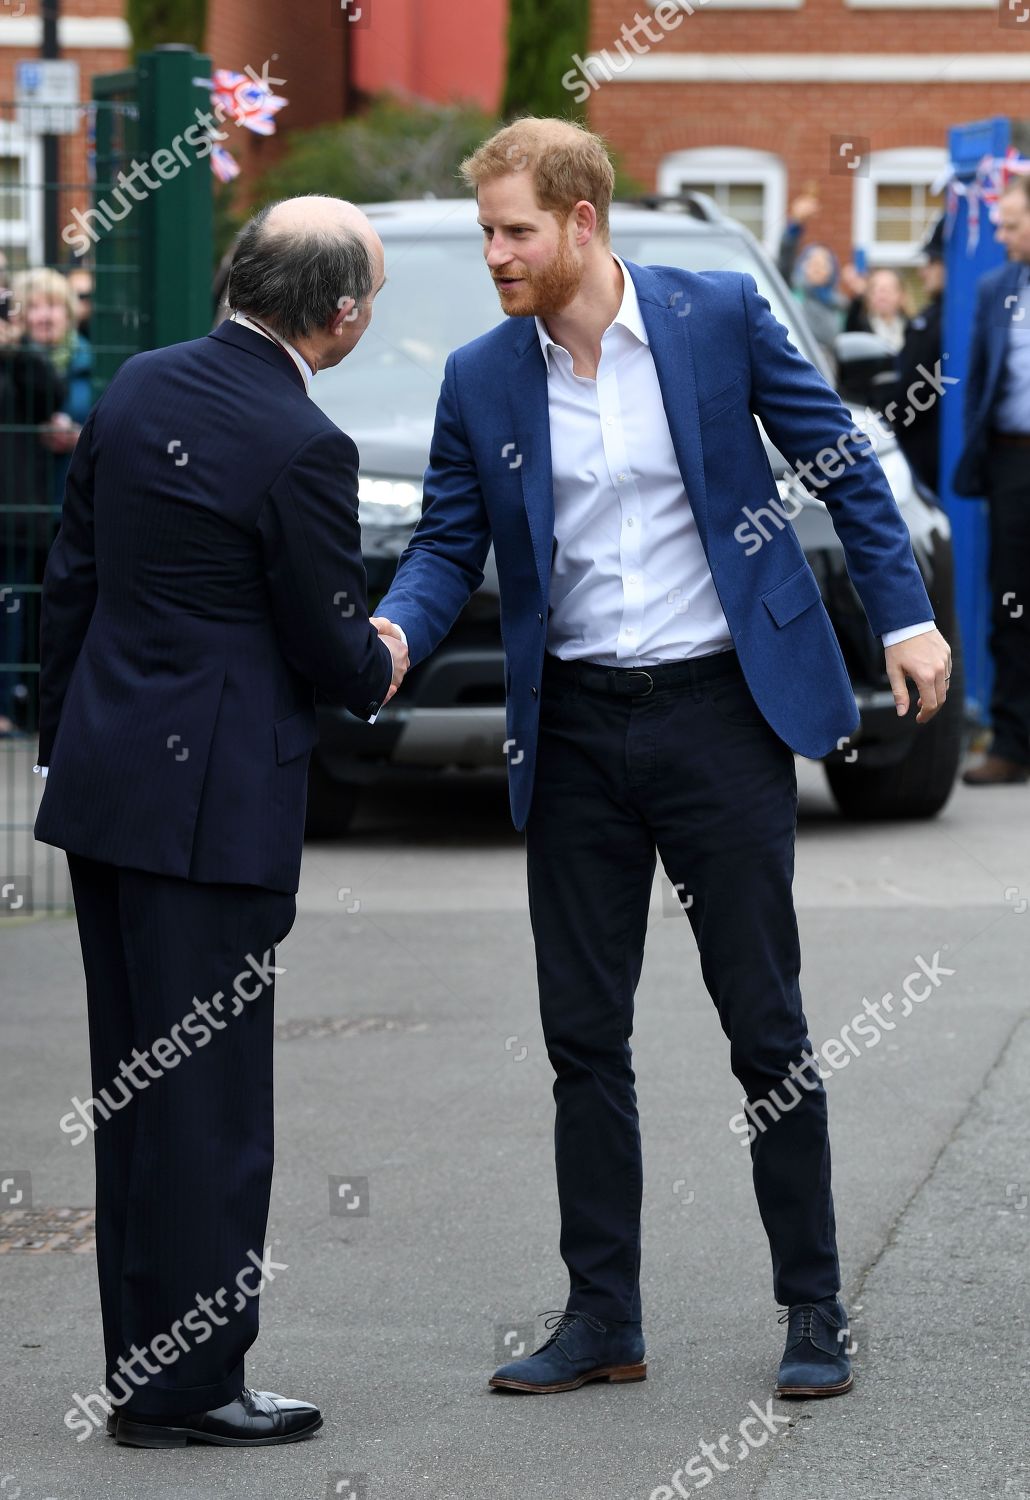 prince-harry-visits-st-vincents-catholic-primary-school-for-commonwealth-canopy-and-woodland-trust-tree-planting-ceremony-london-uk-shutterstock-editorial-10160984b.jpg